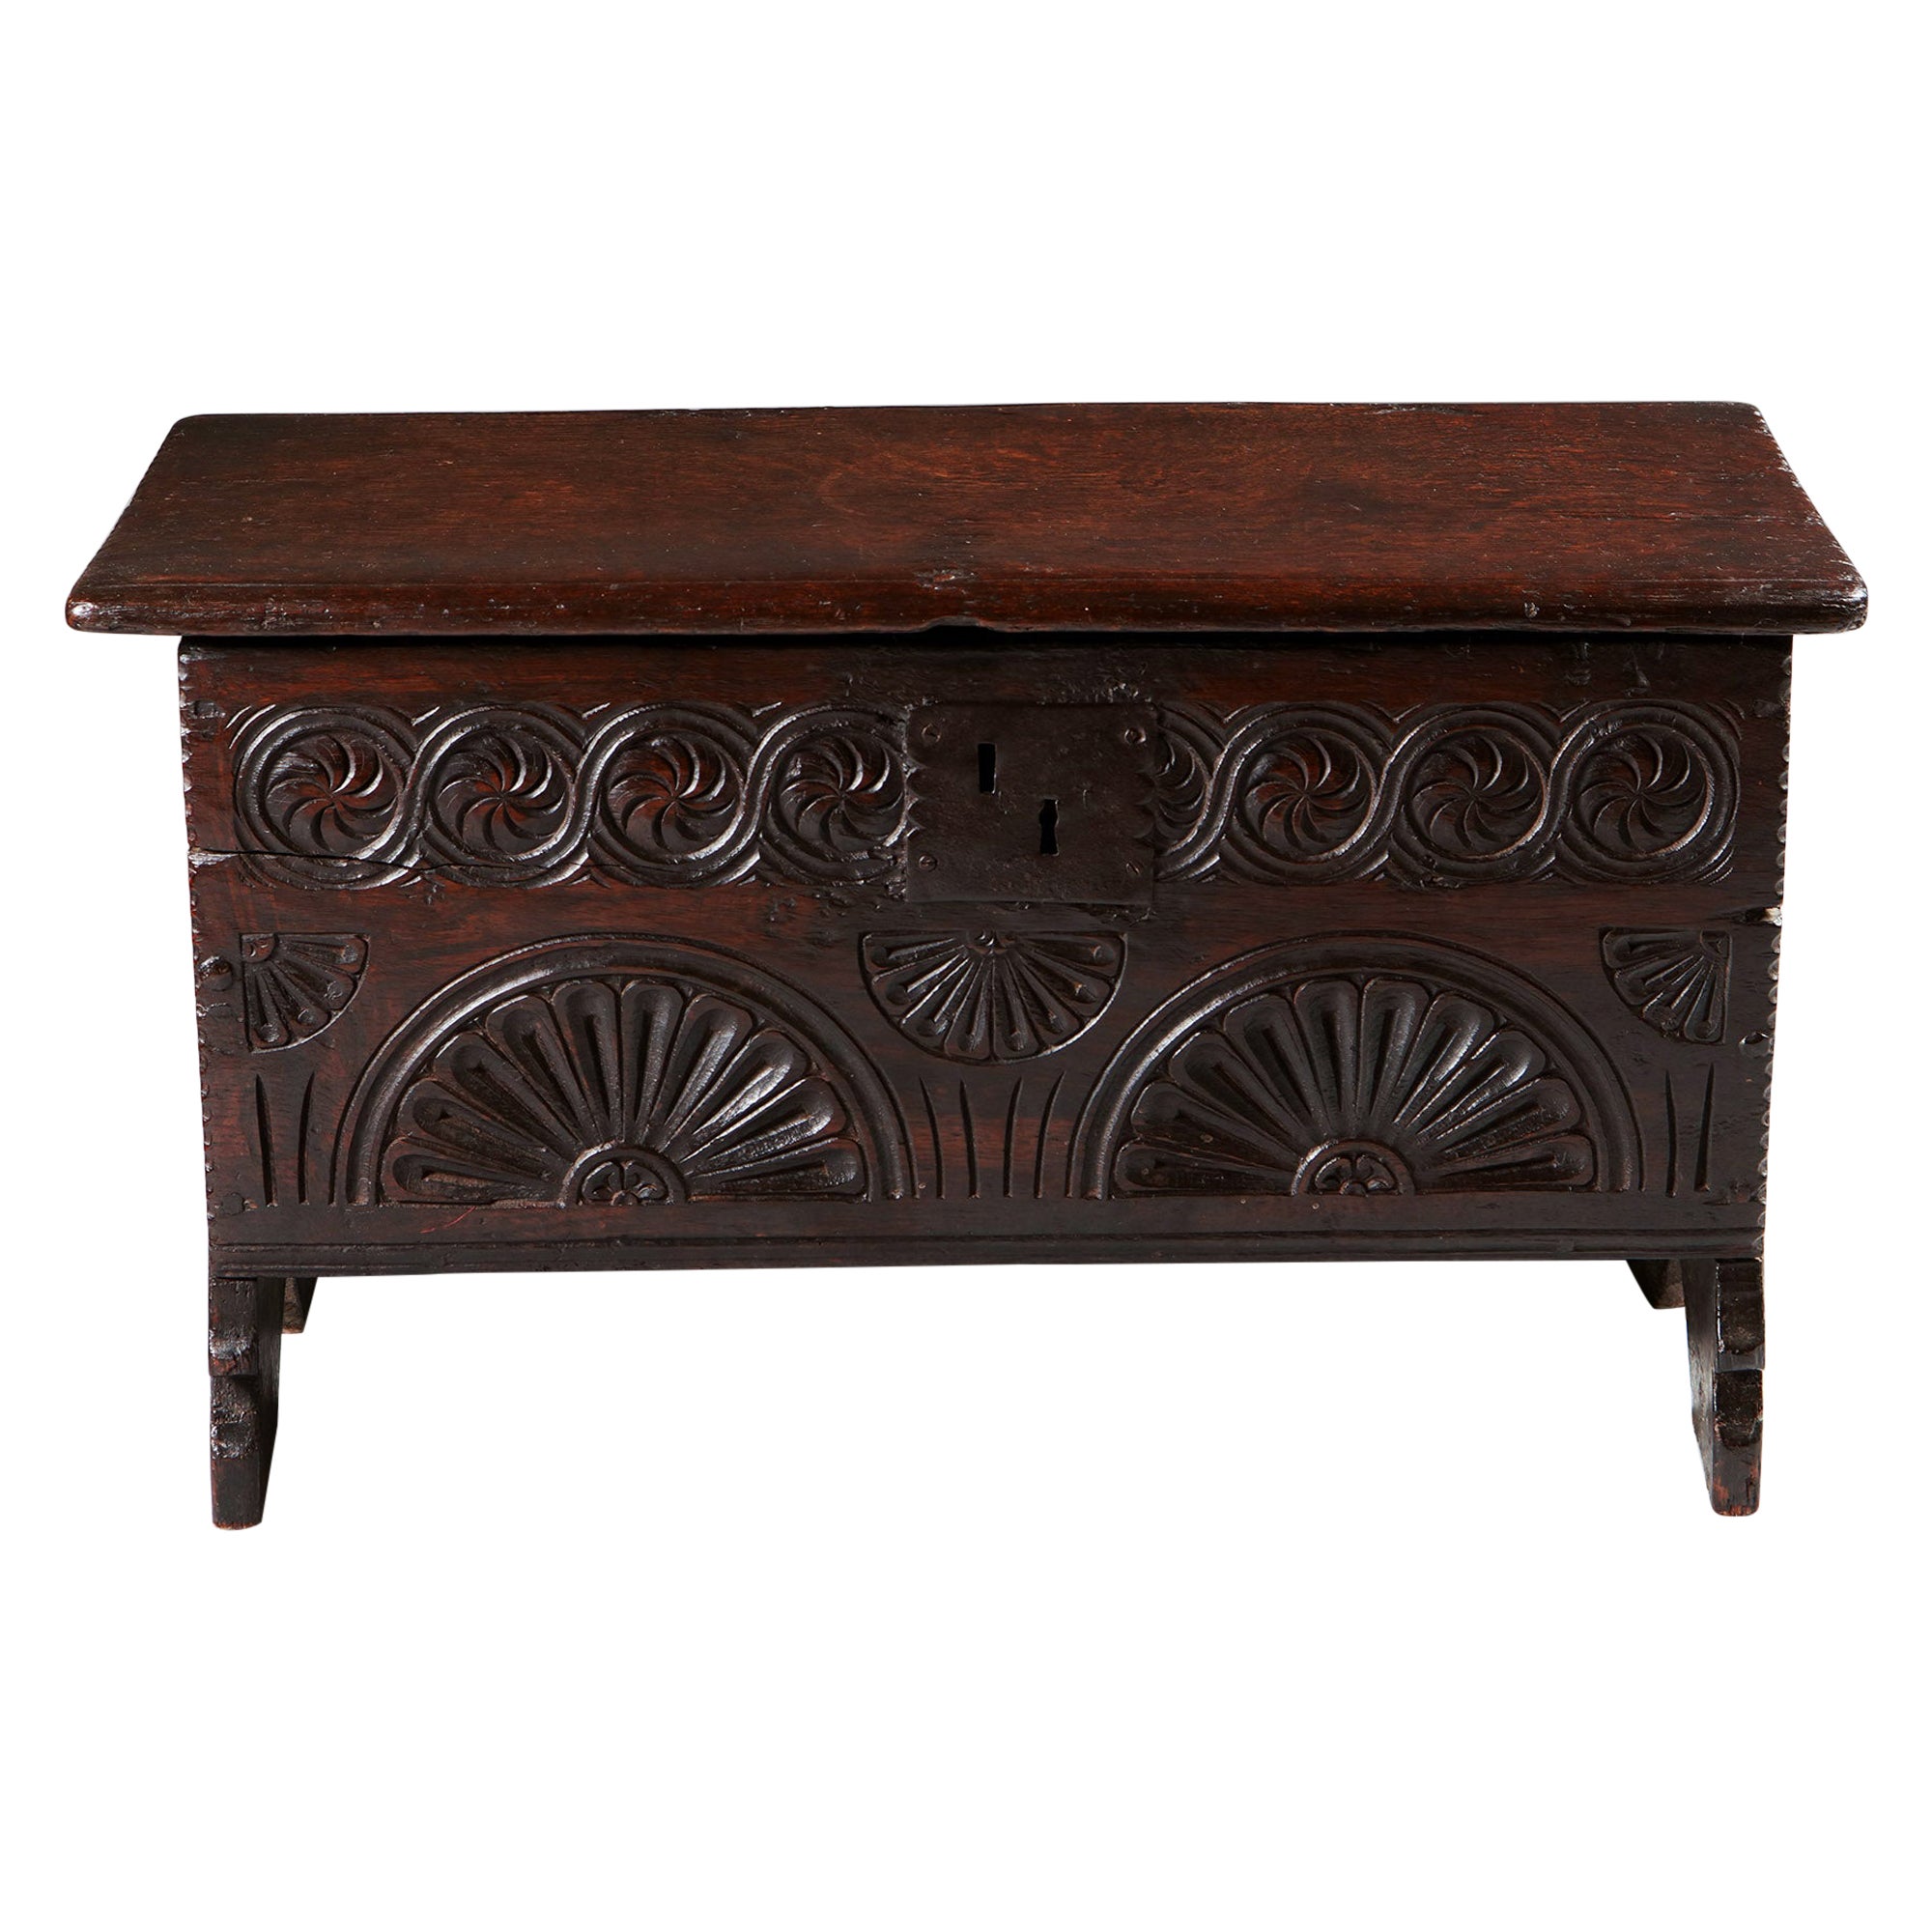 A Rare 17th Century Charles II Carved Oak Childs Coffer of Diminutive Proportion For Sale